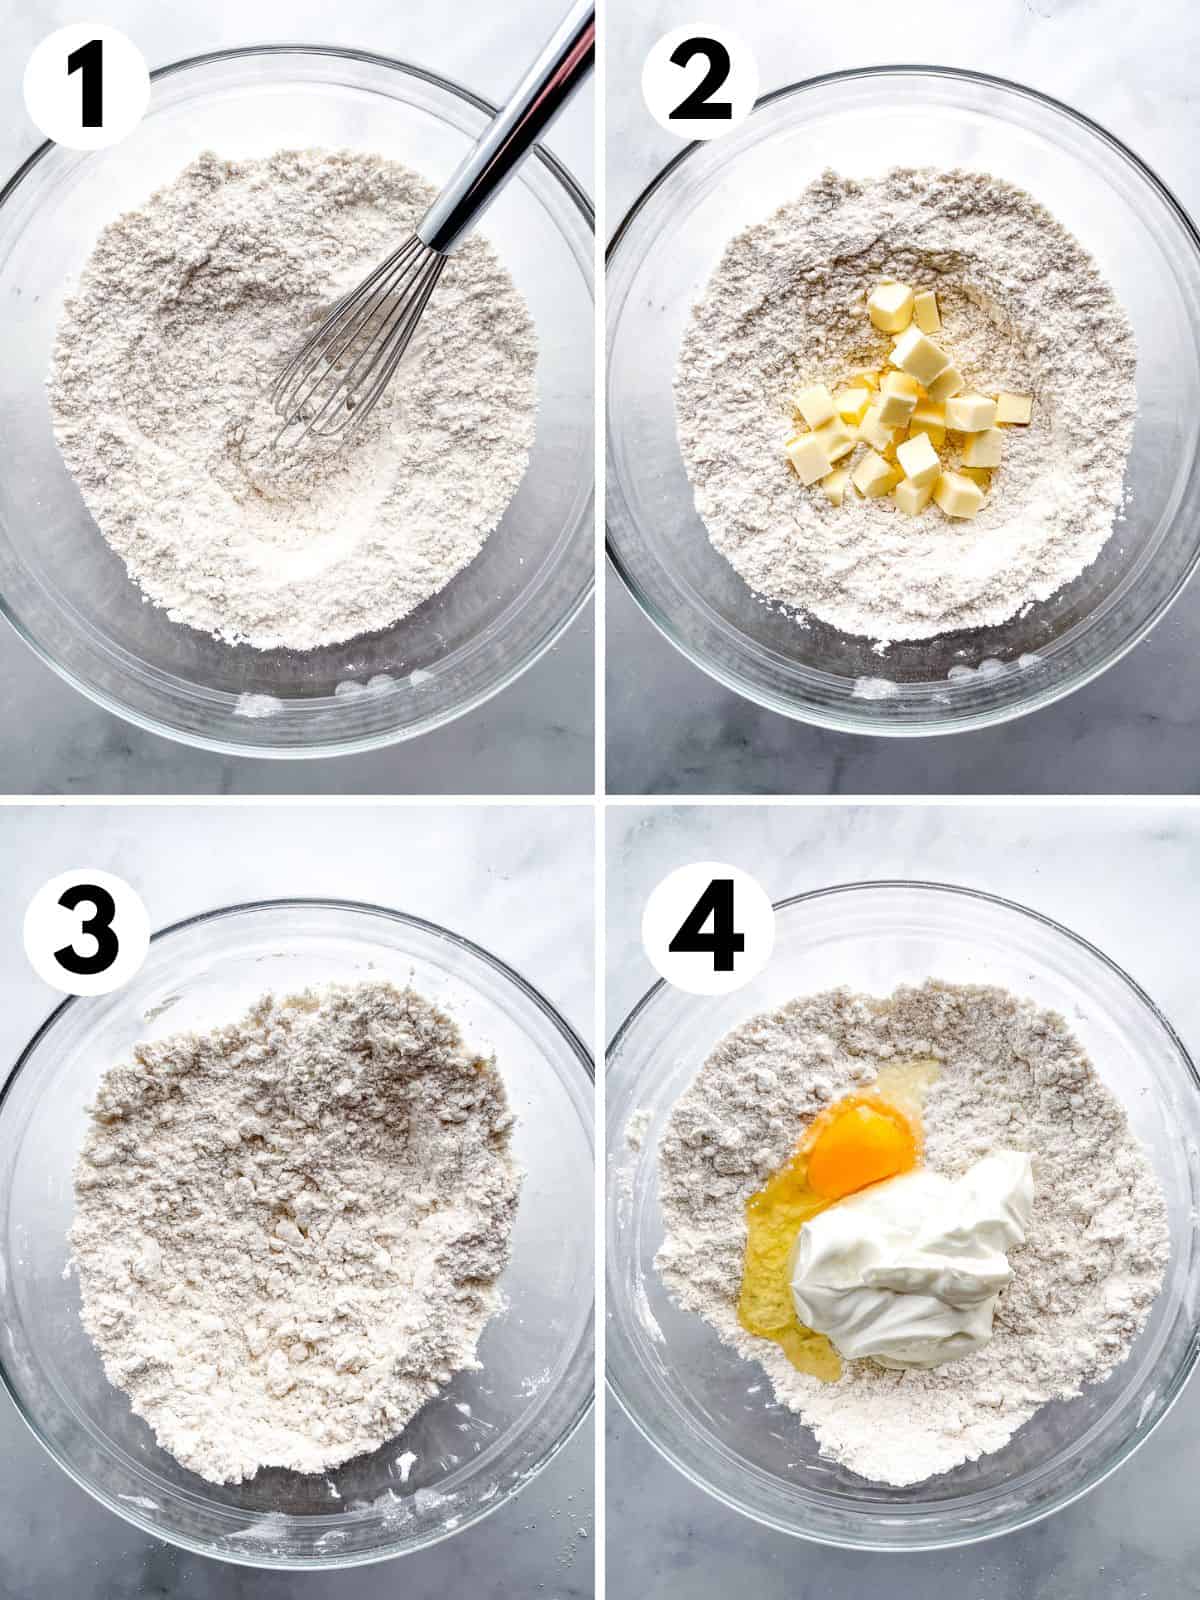 The first four steps for mixing gluten-free biscuits. 1. Whisking the dry ingredients. 2. Adding cold cubed butter. 3. Butter mixed into the dry ingredients. 4. Yogurt and an egg sitting on top of the gluten-free dry ingredients.